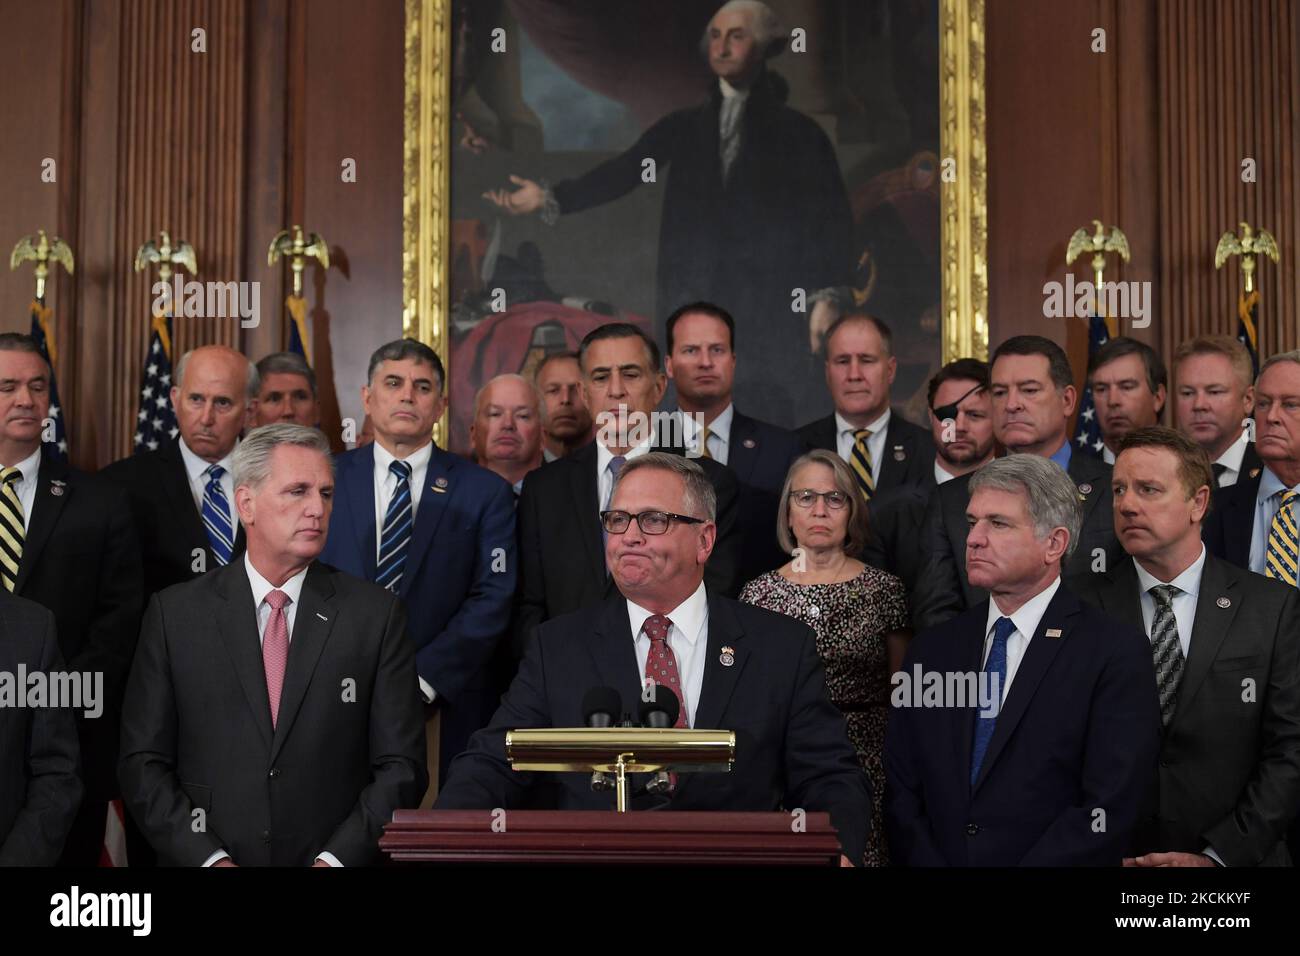 Republican Veterans Affairs Committee Ranking member Mike Bost(R-ILL) speaks about Afghanistan and Accountability during a press conference, today on August 31, 2021 at House/Capitol Hill in Washington DC, USA. (Photo by Lenin Nolly/NurPhoto) Stock Photo